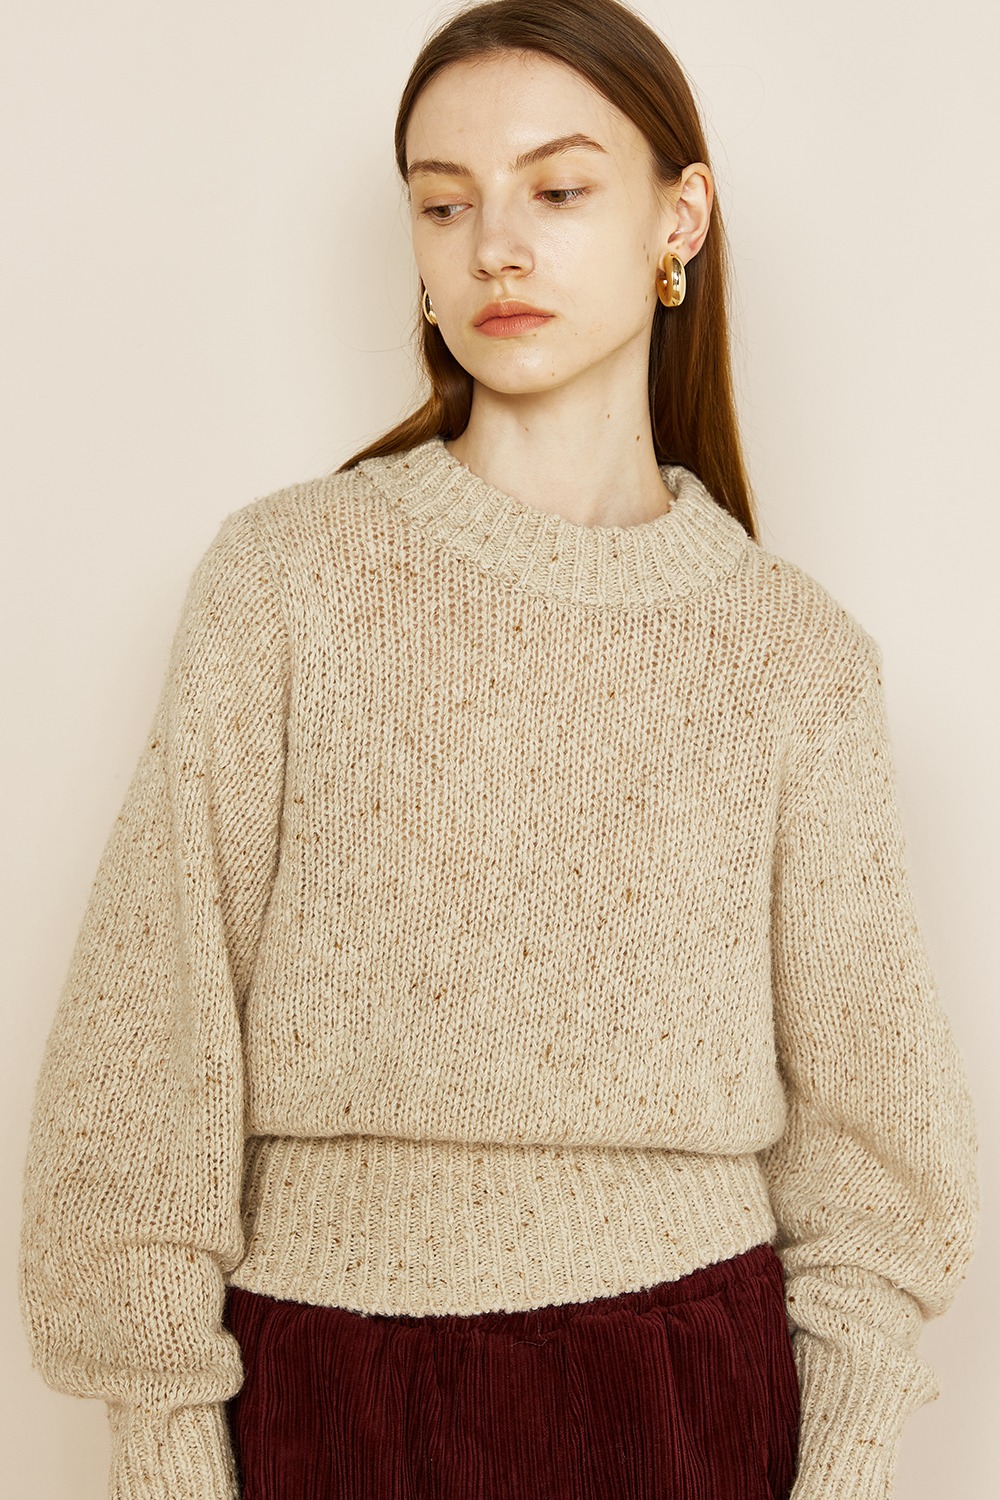 Round Sleeve Knit Oatmeal